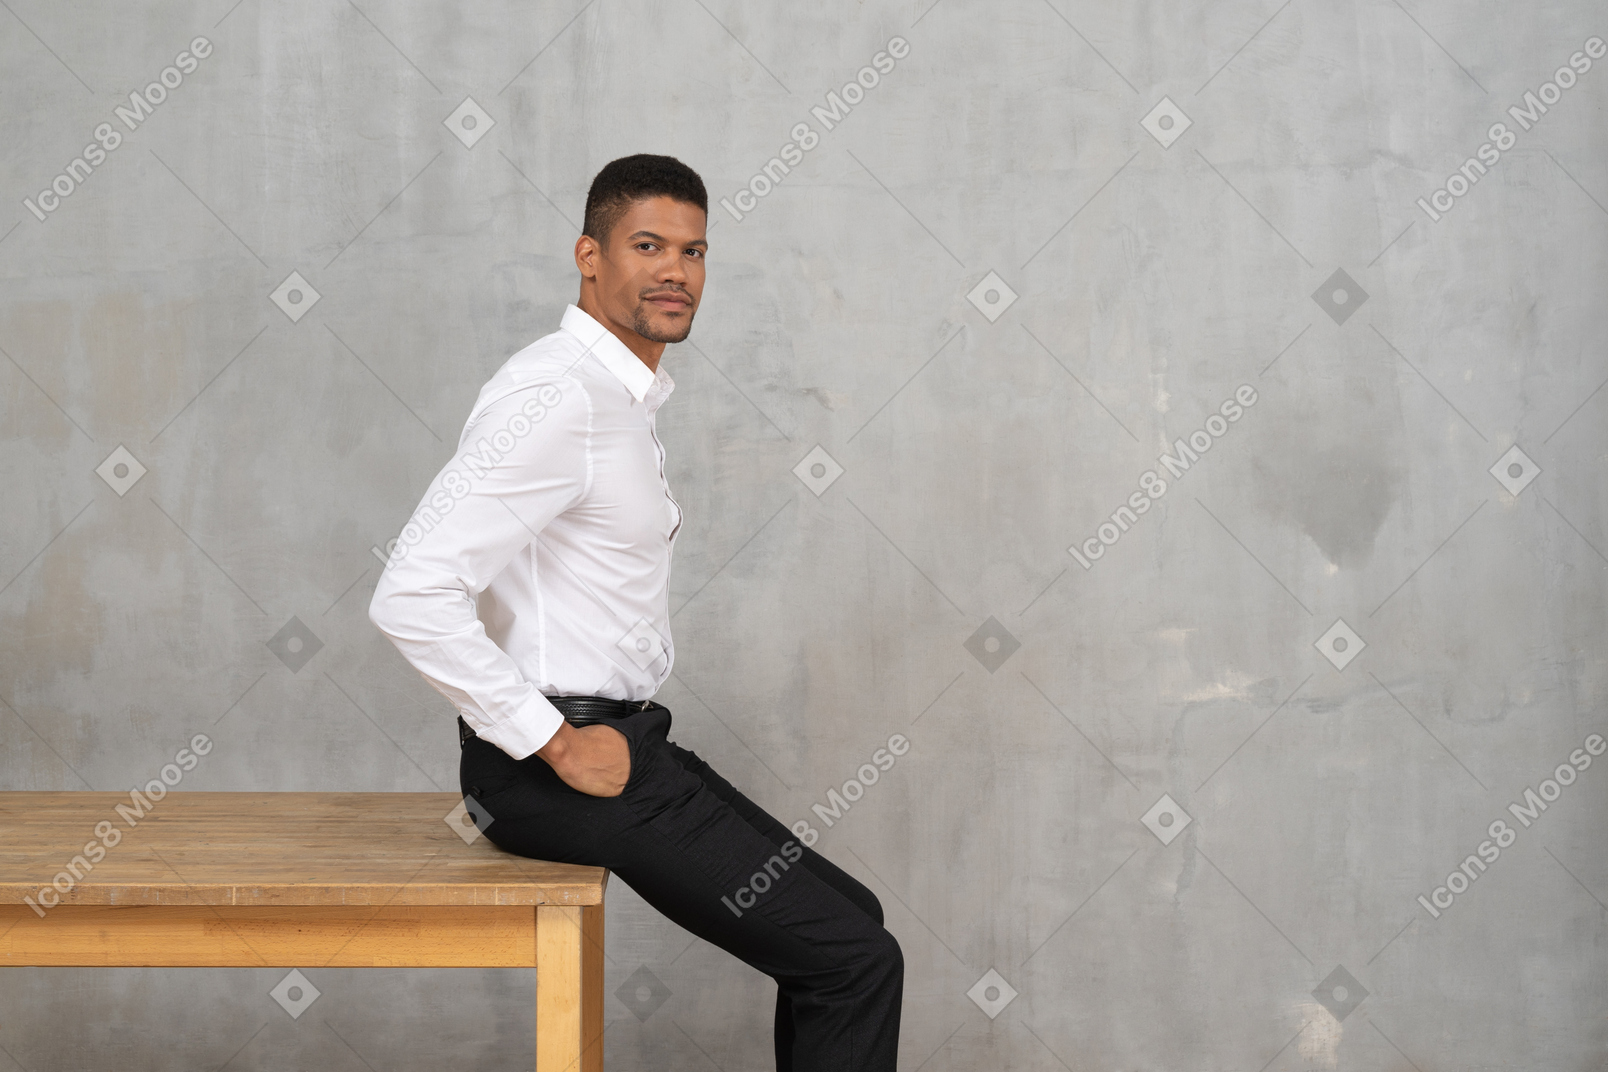 Man in office clothes sitting on a table with hands in pockets